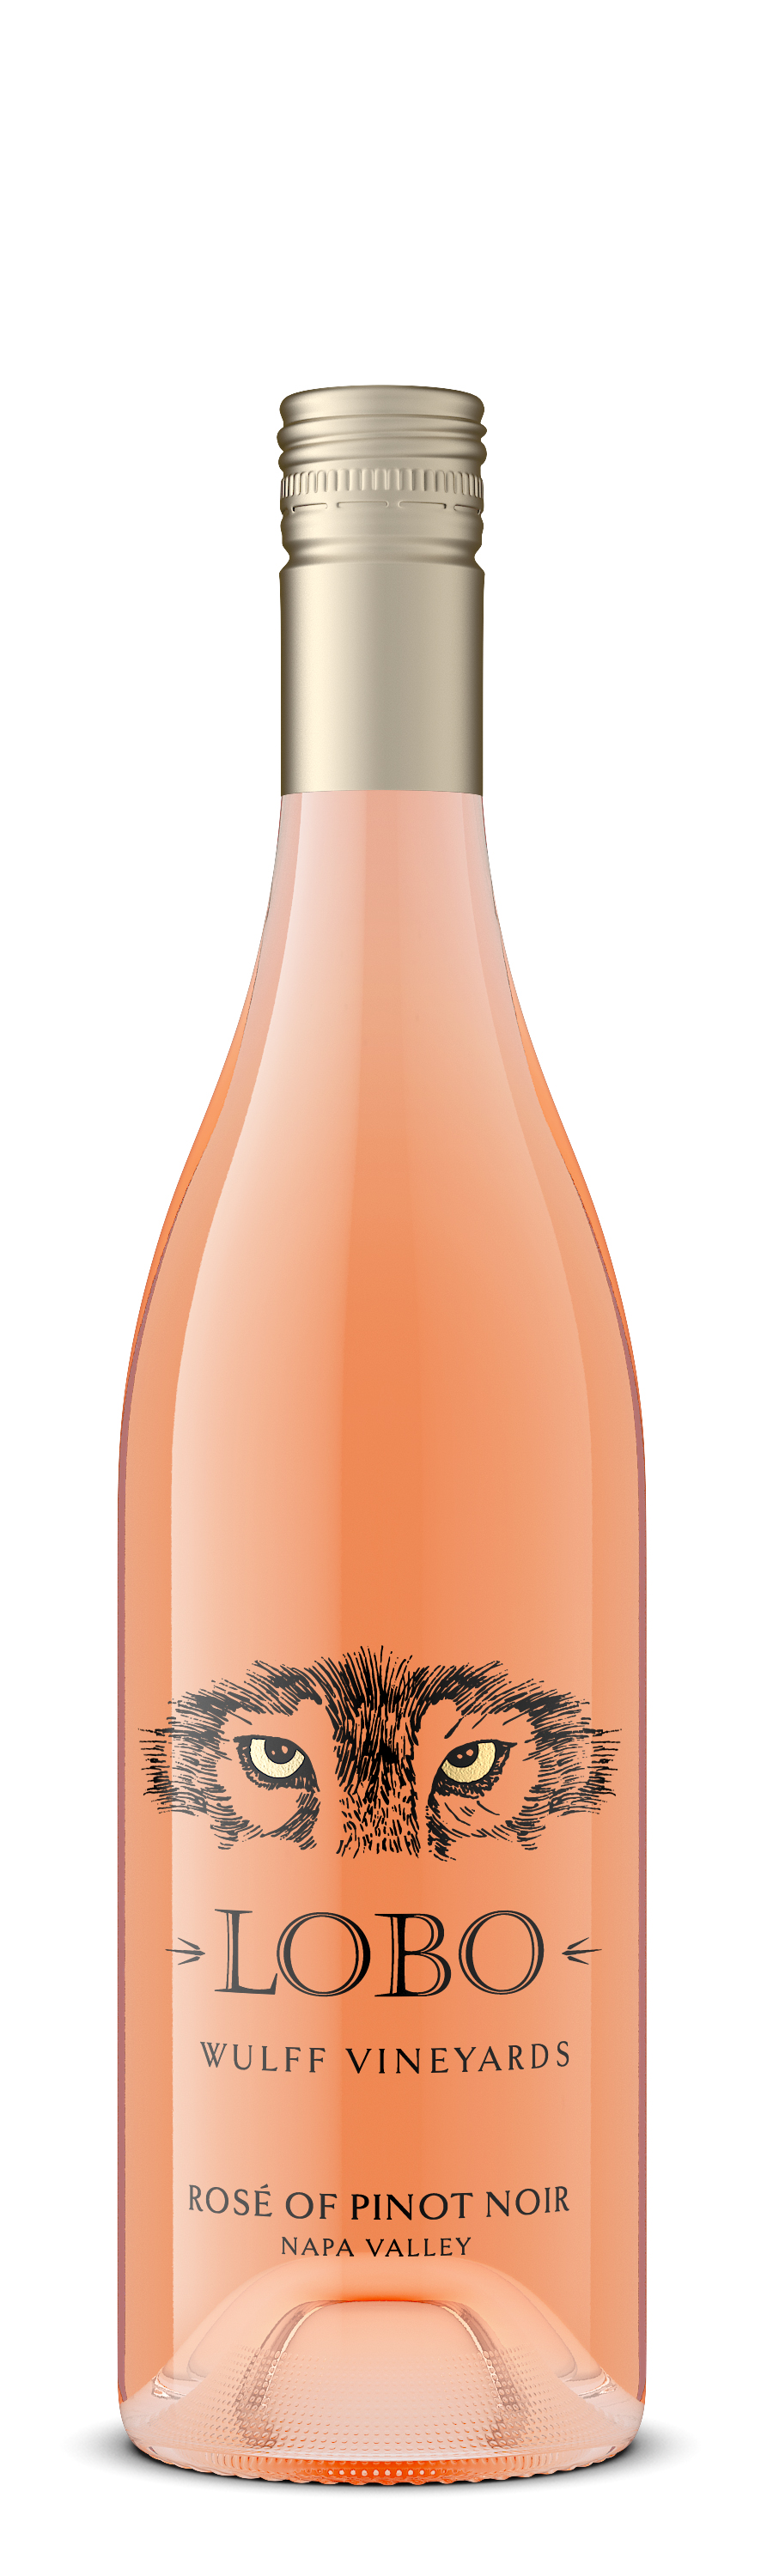 Product Image for 2019 Rosé